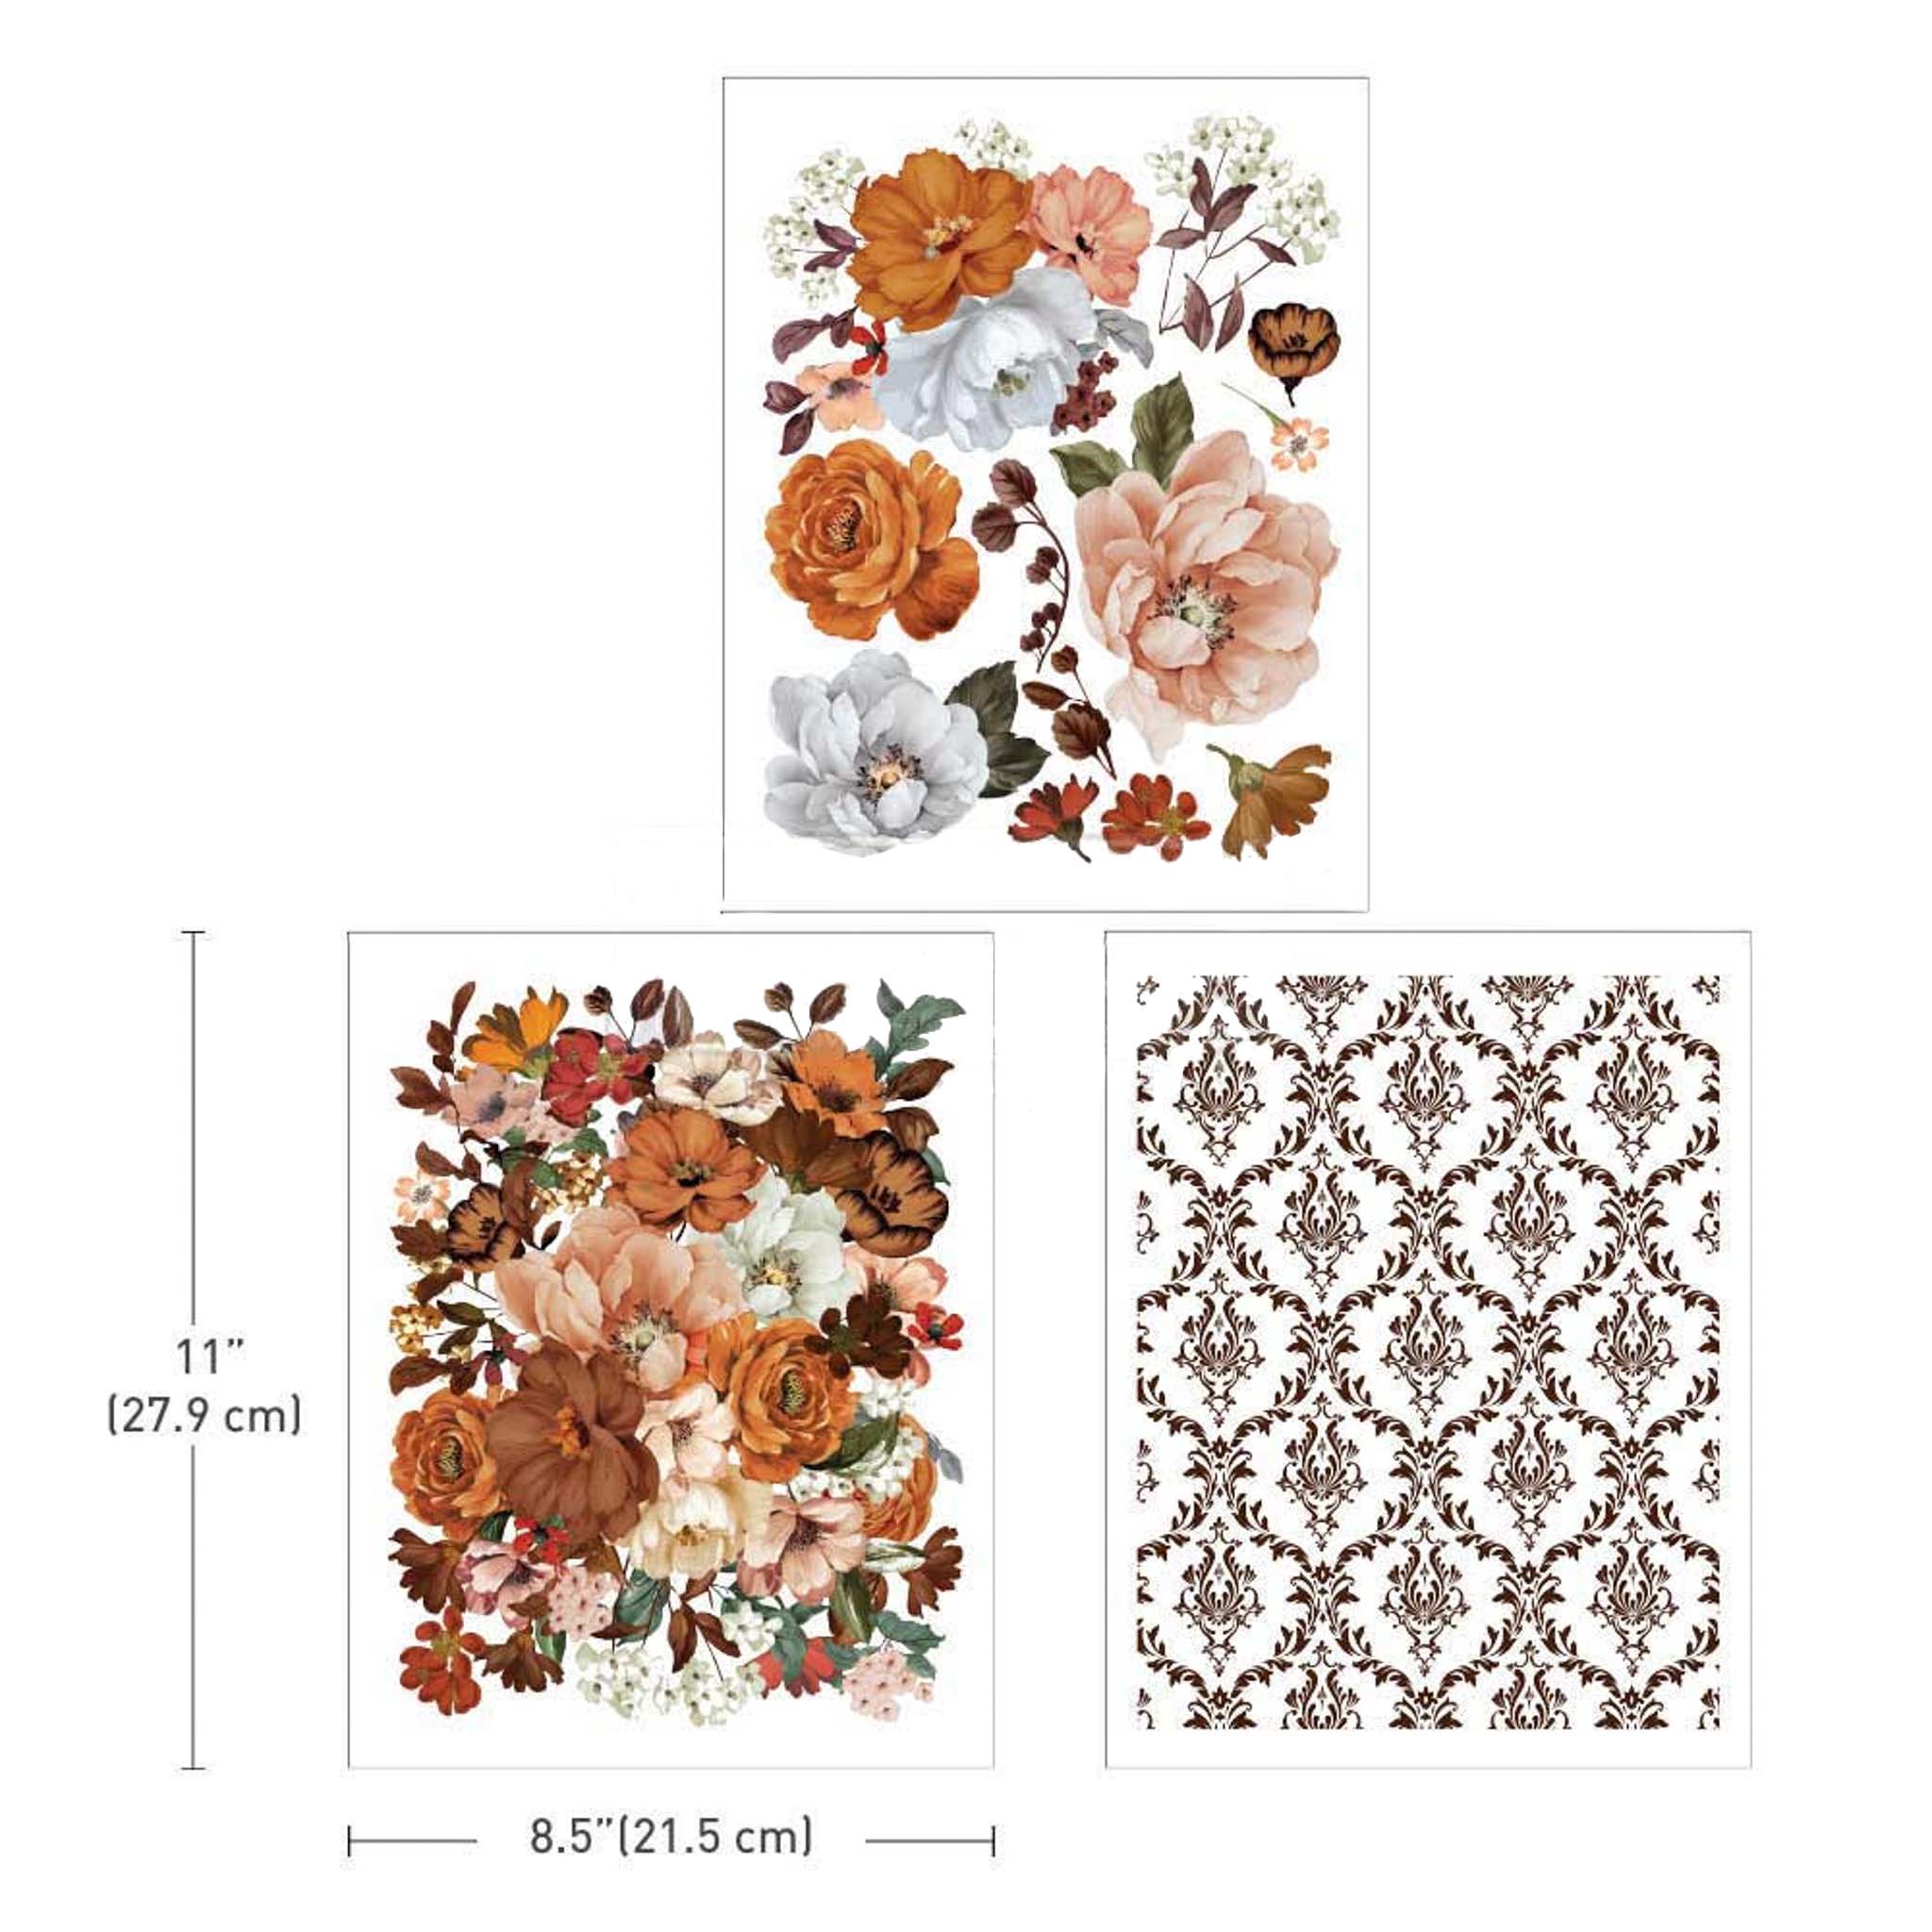 Three sheets of small rub-on transfers of peach and brown colored flowers and a brown damask design. Measurements for 1 sheet reads: 11" [27.9 cm] by 8.5" [21.5 cm].